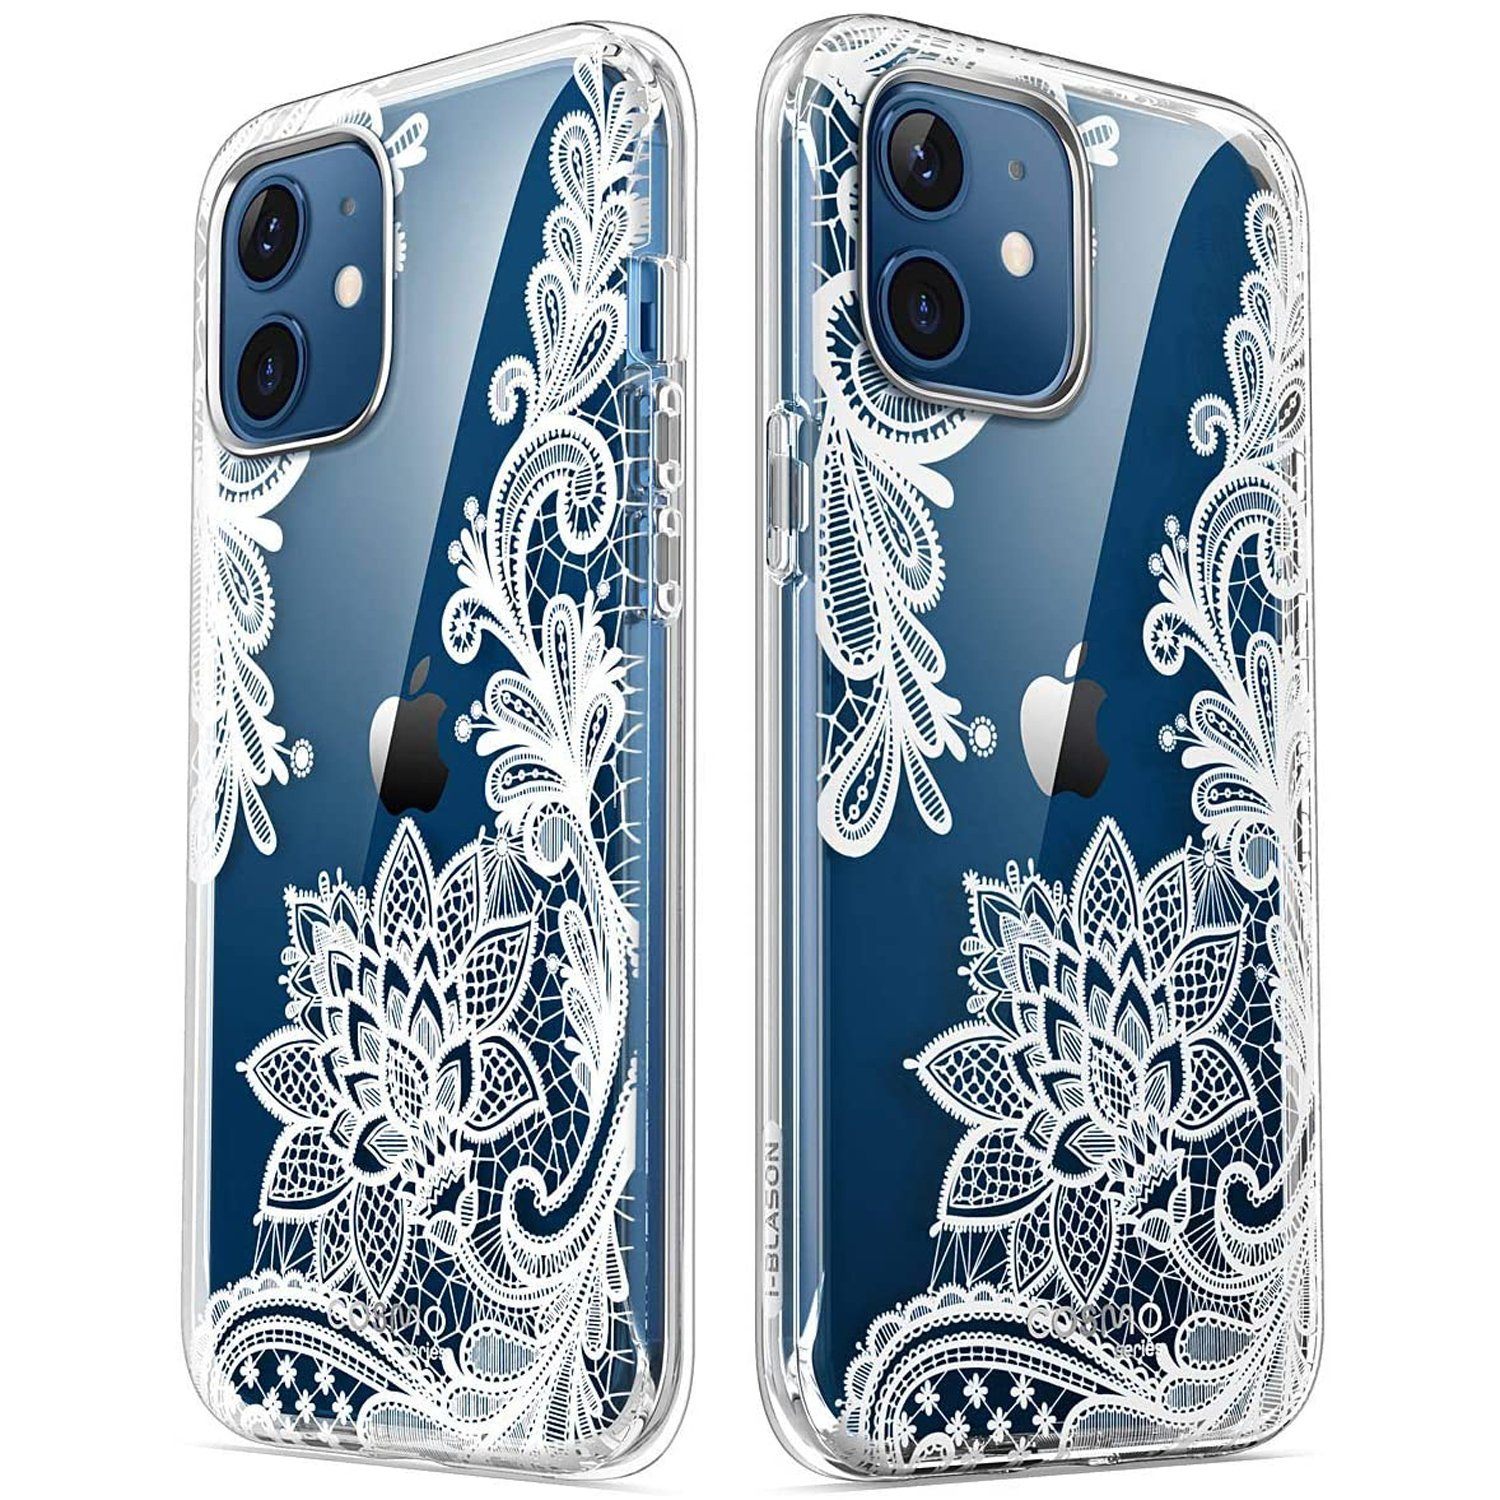 i-Blason Cosmo Series Case for iPhone 12/12 Pro 6.1"(2020)(With Build-in Screen Protector), Lace/White Default i-Blason 